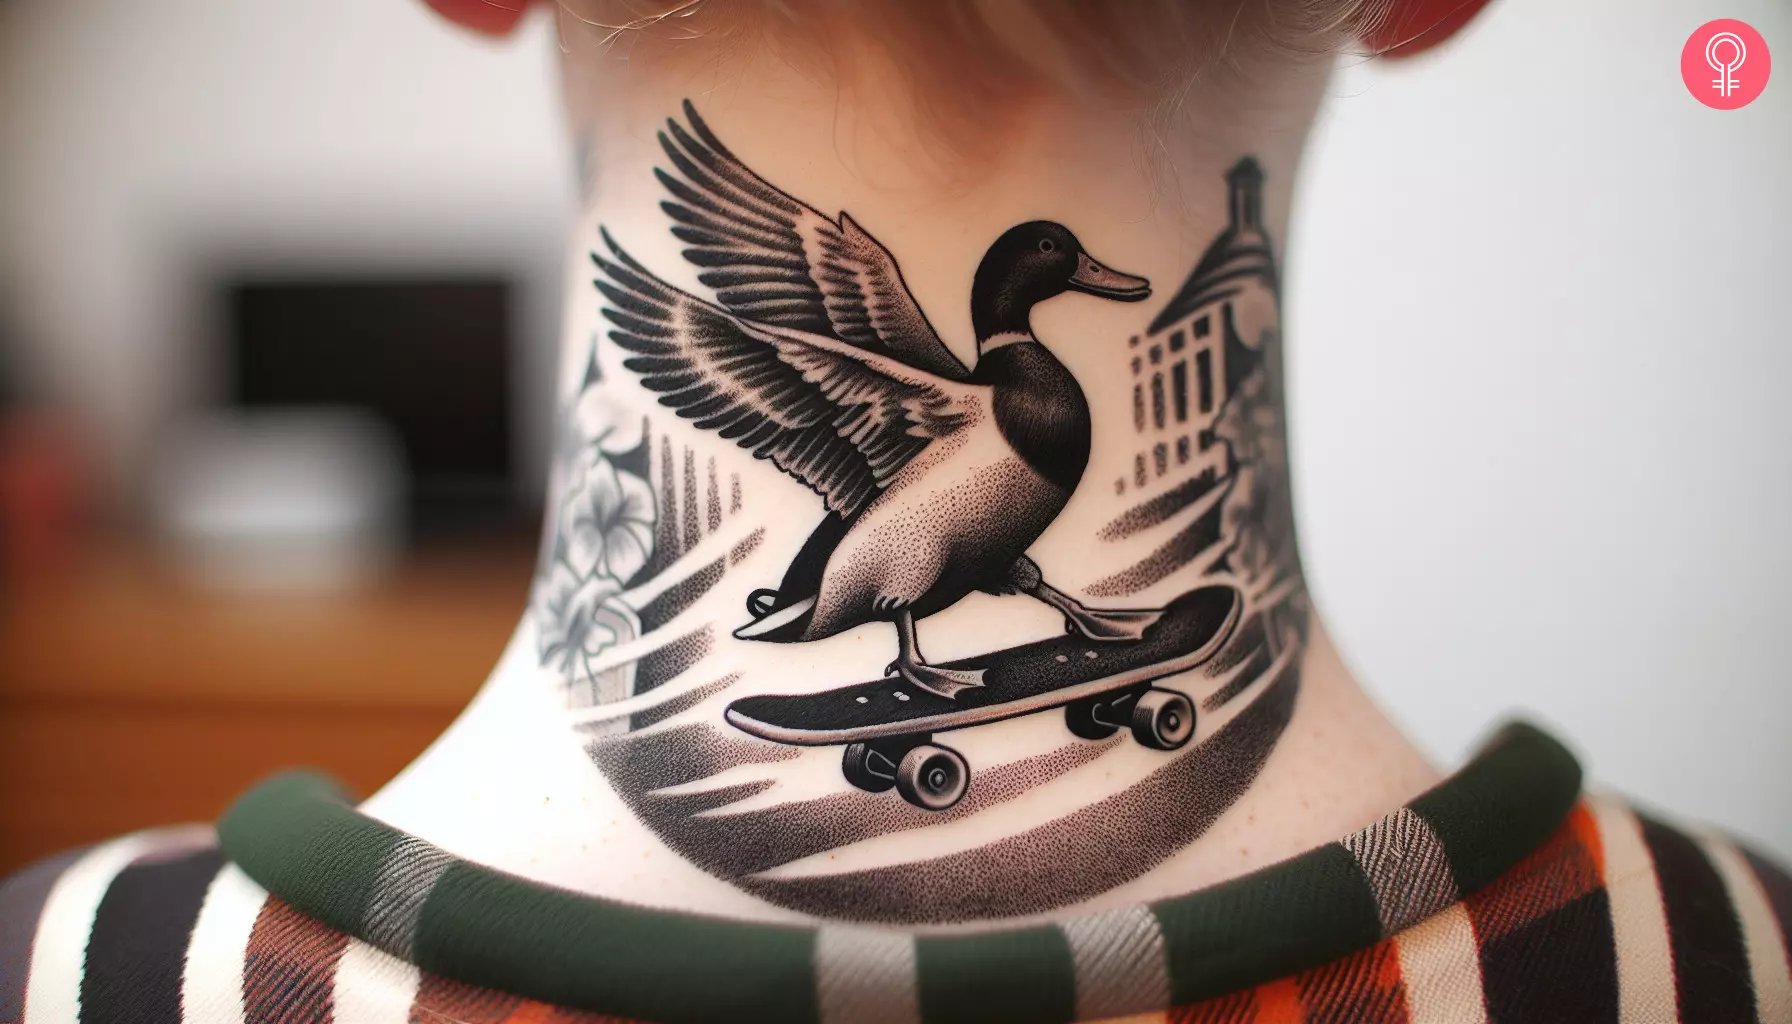 A duck on a skateboard tattoo on the back of the neck